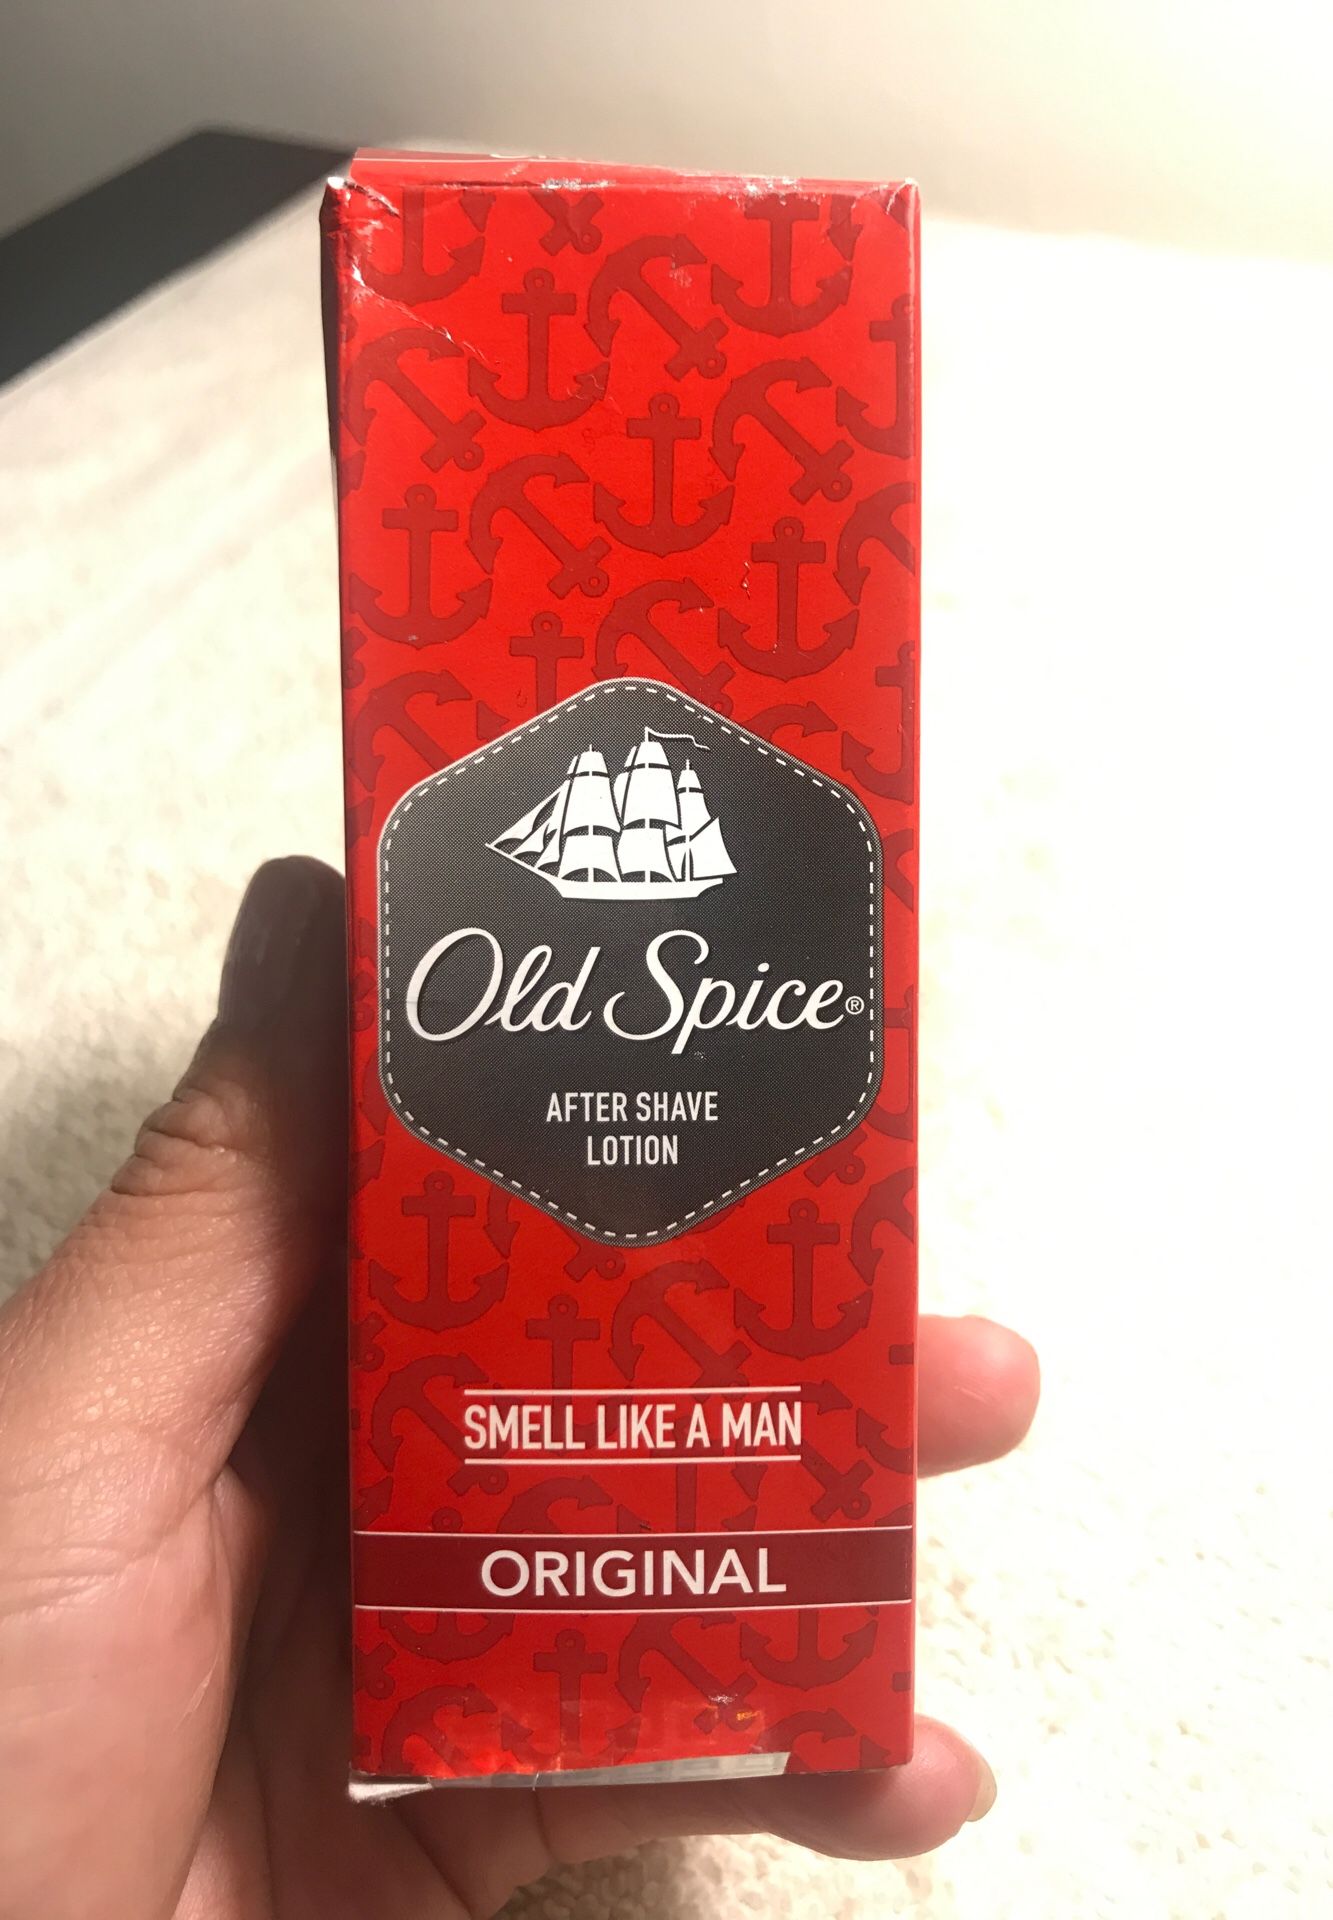 Old spice after shave